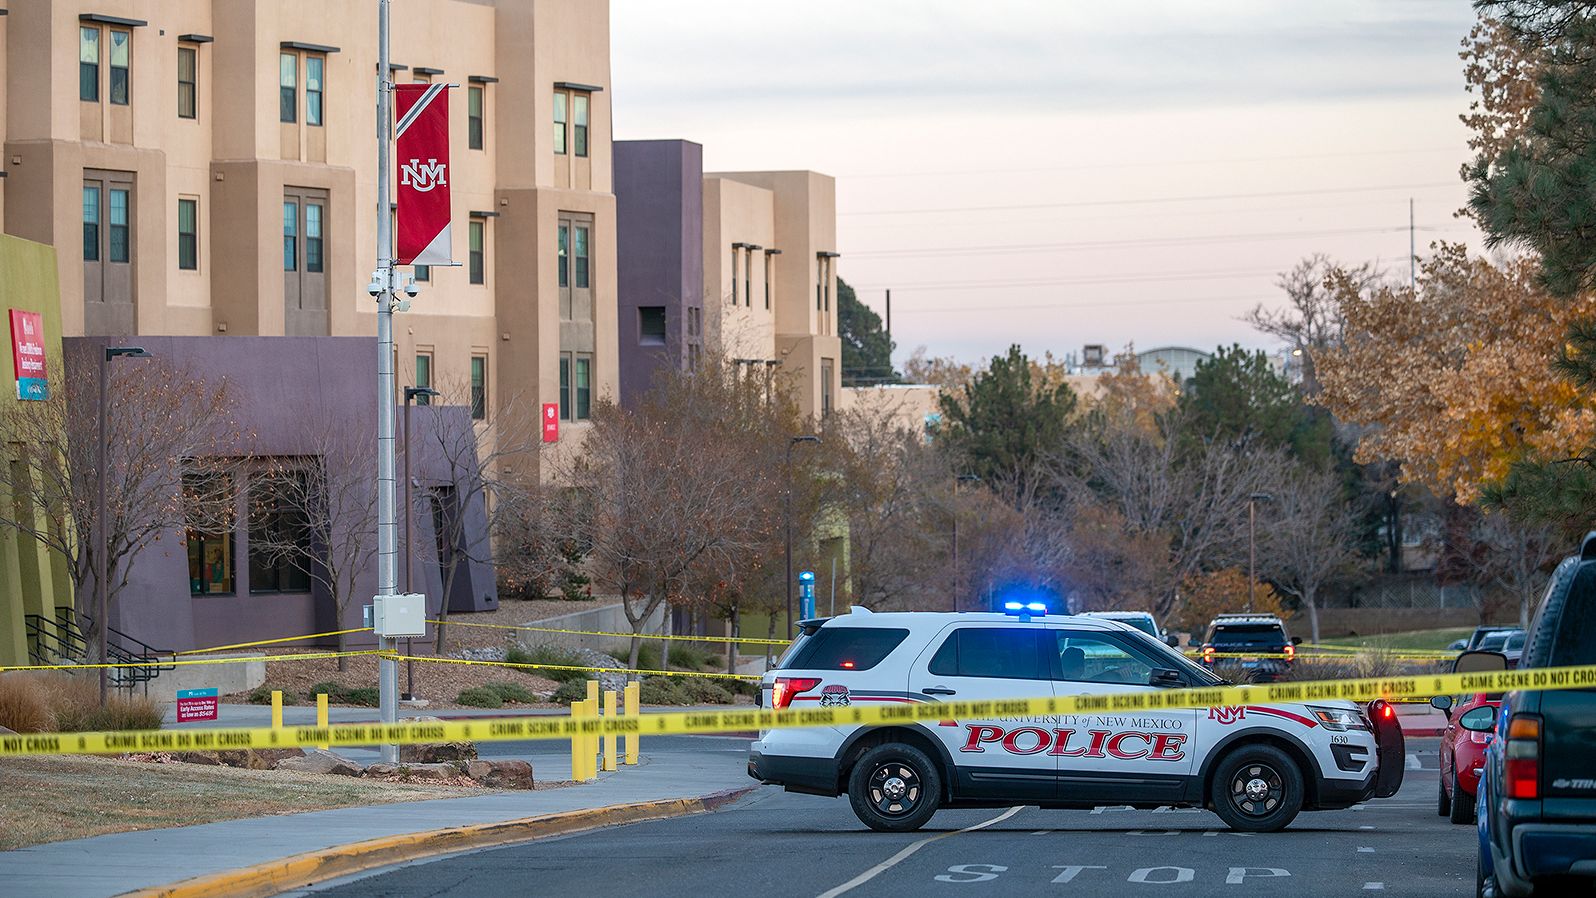 New Mexico State Police assists APD officers in investigating a deadly overnight shooting on the University of New Mexico campus Saturday.